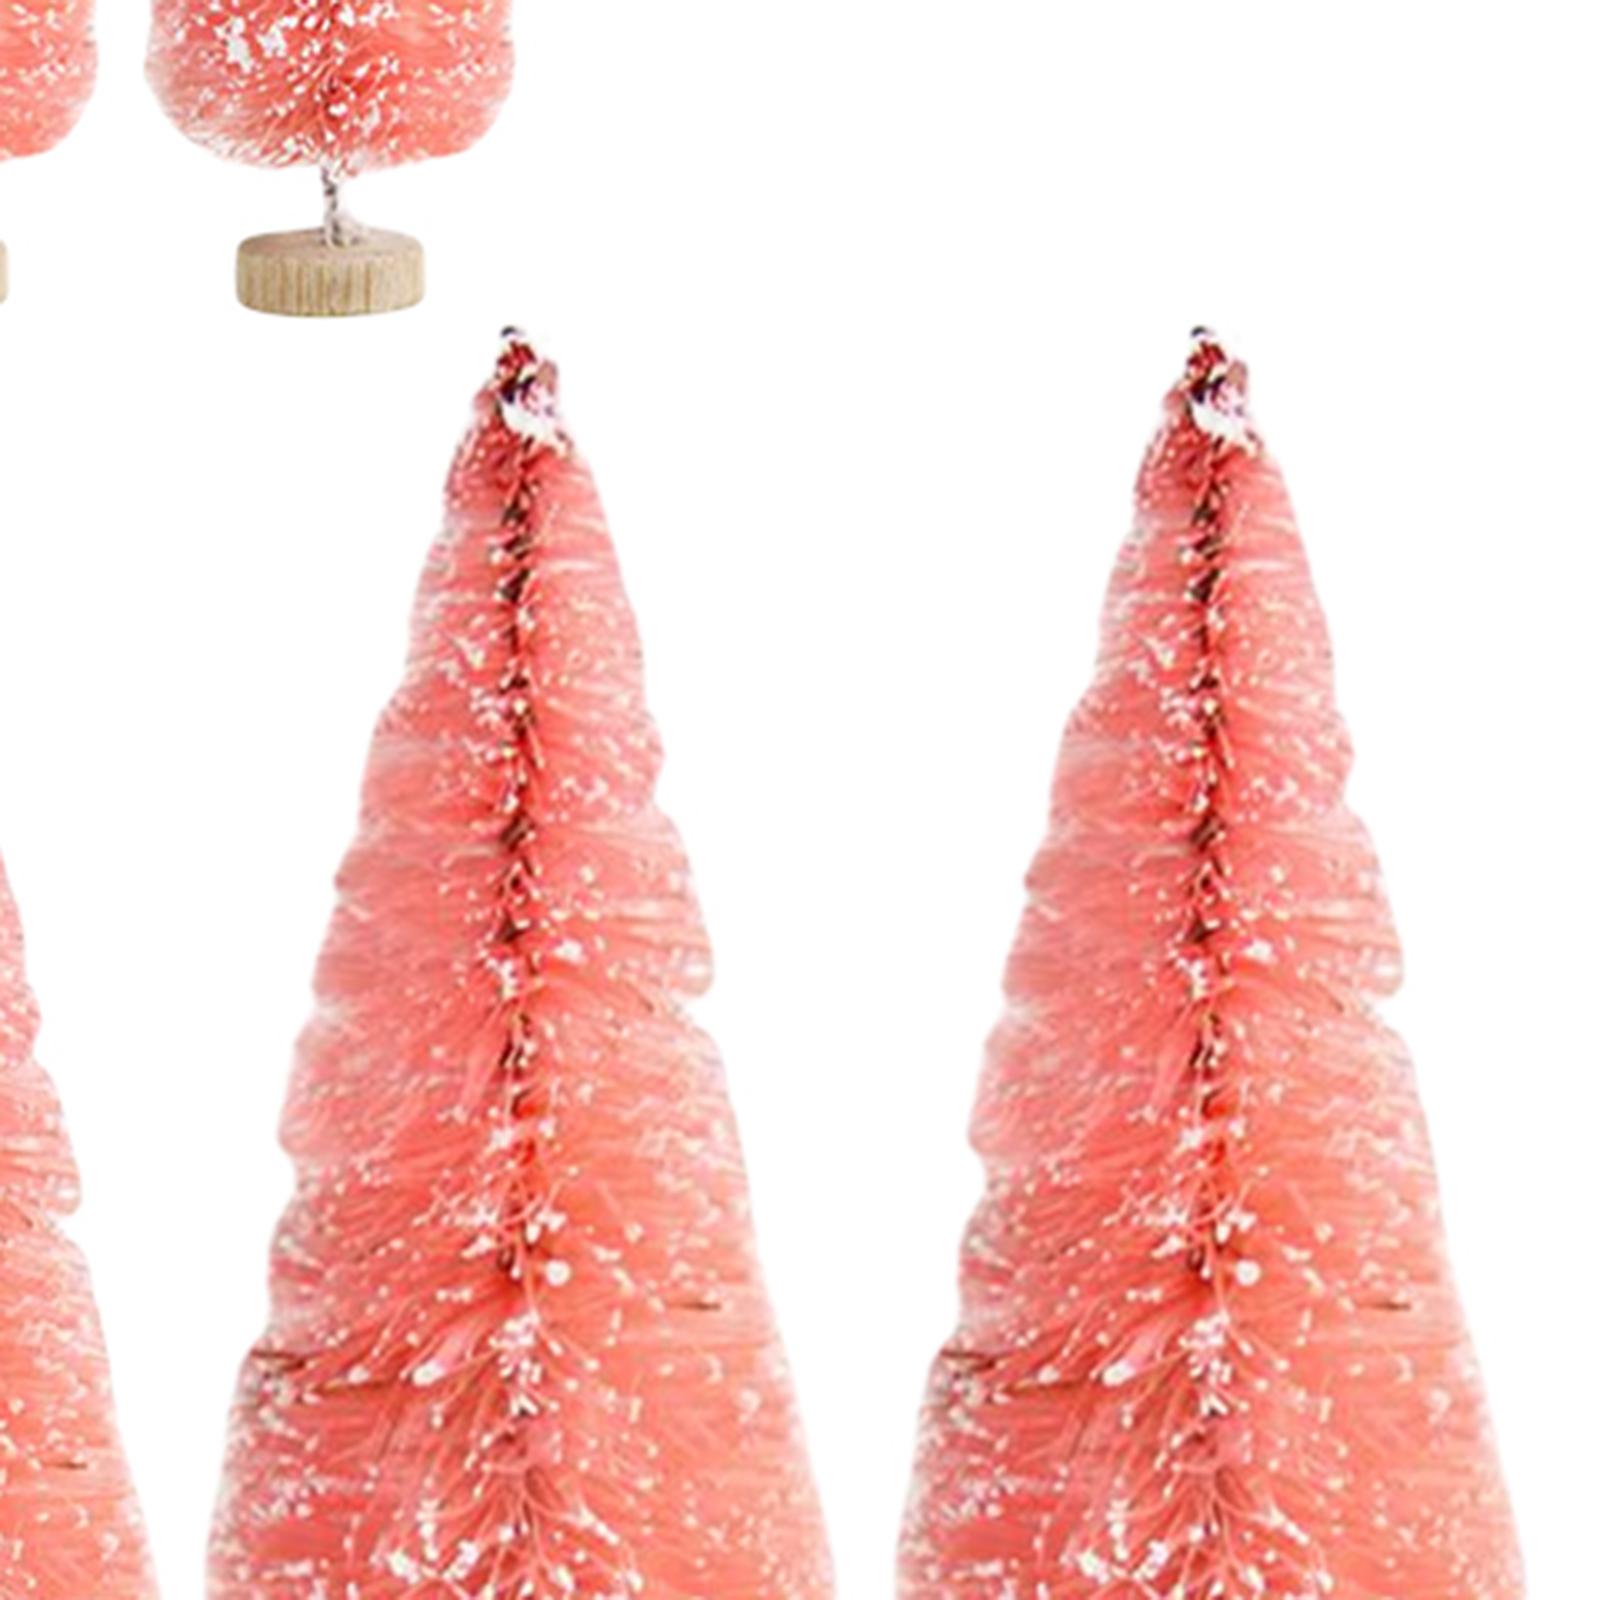 8x Desktop Miniature Pine Tree Ornaments for Desk Christmas Party Holiday Pink